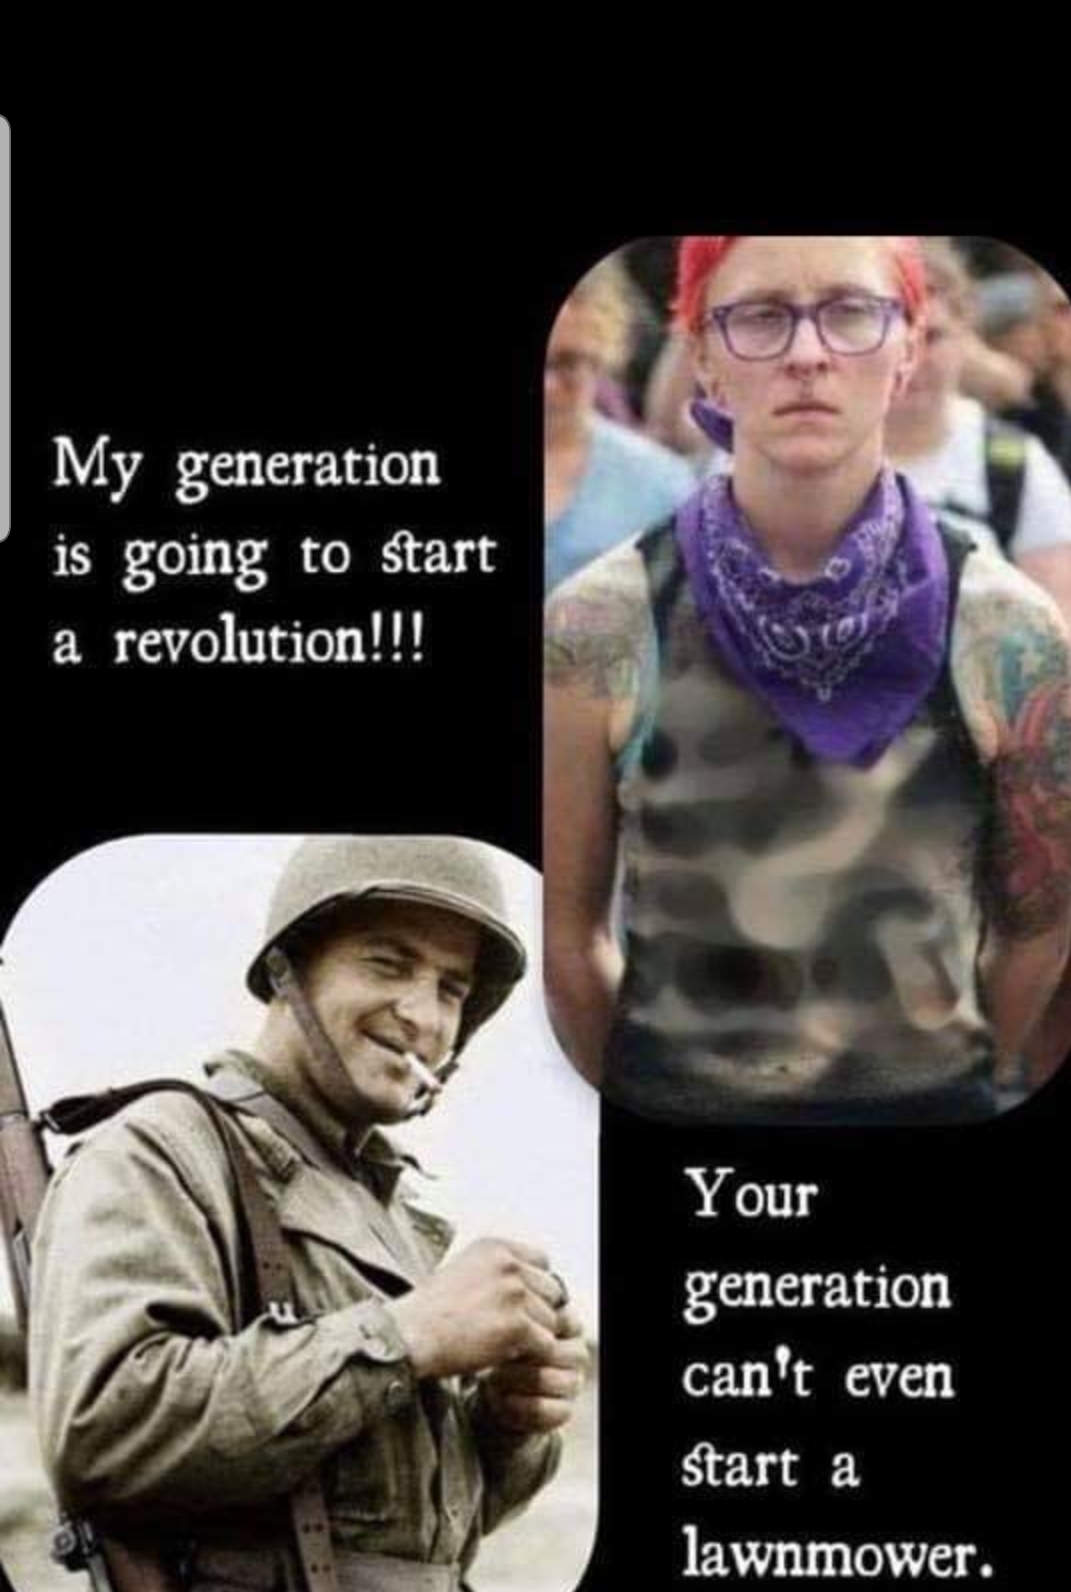 too much soy - My generation is going to start a revolution!!! Your generation can't even start a lawnmower.